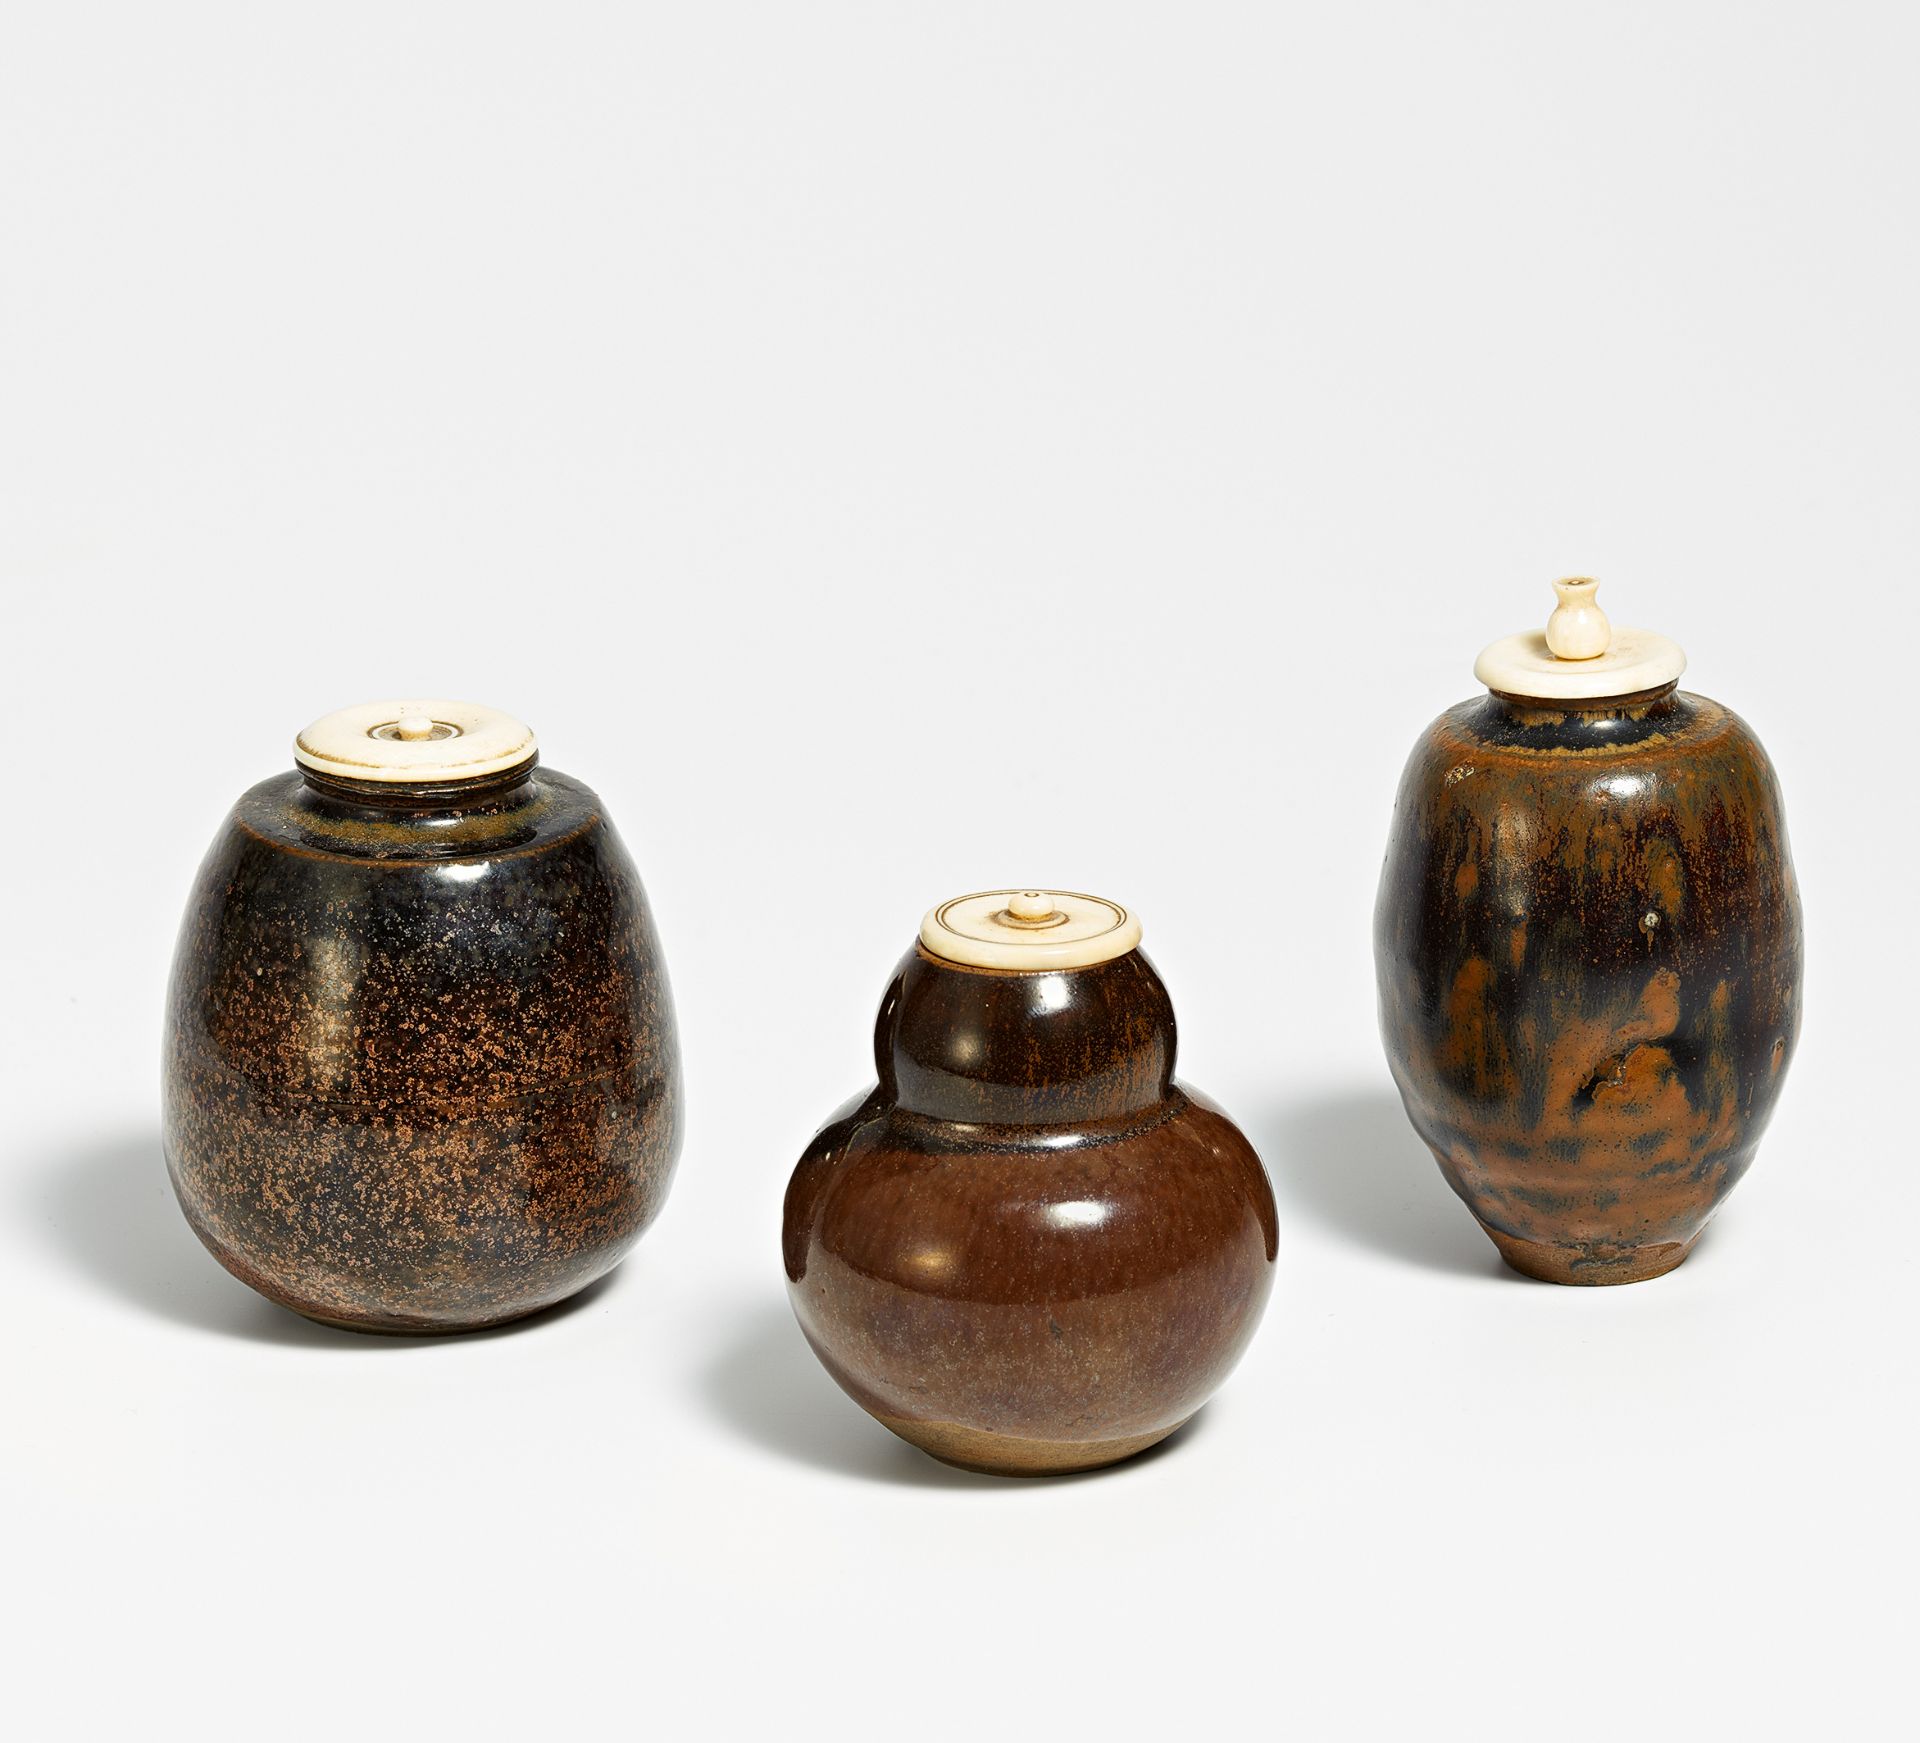 THREE CADDIES FOR POWERED TEA (CHAIRE). Japan. 18th/19th c. Fine light grey stoneware. a) Bulbous - Image 2 of 2